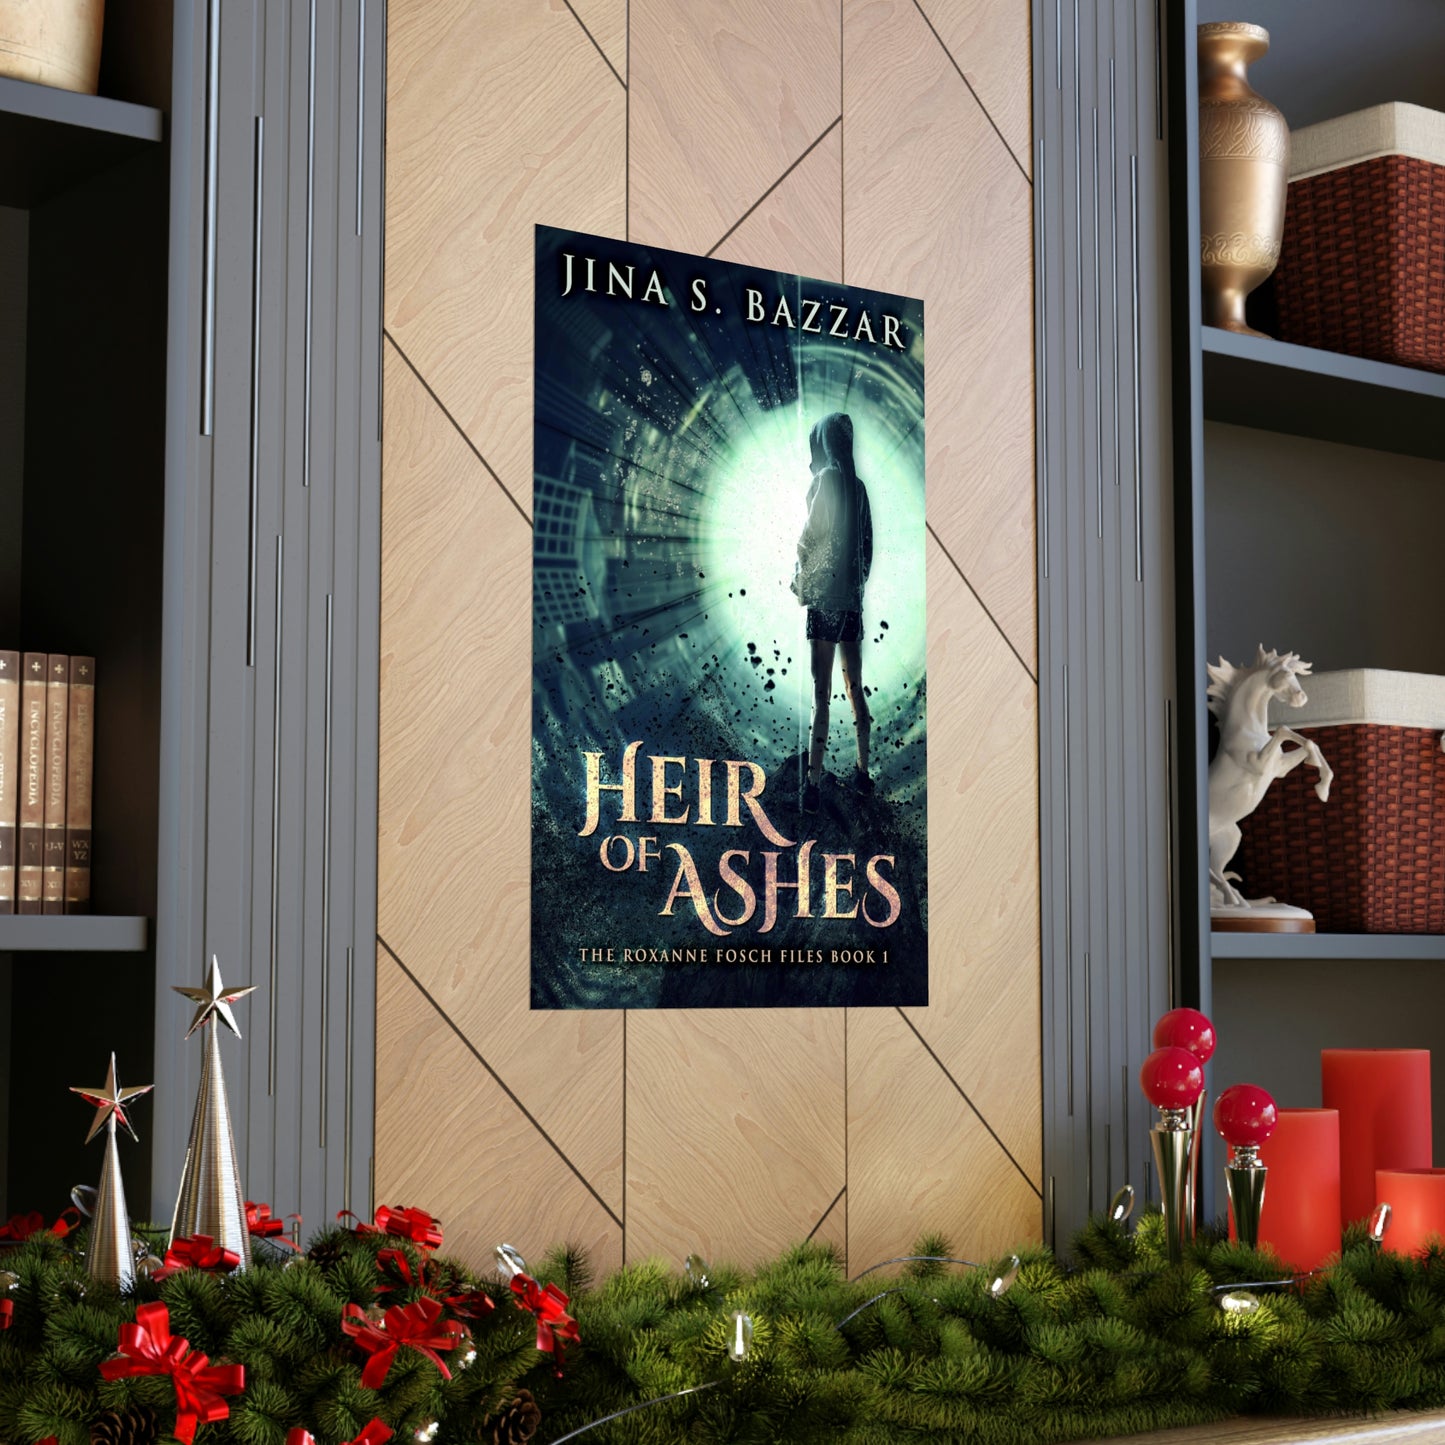 Heir of Ashes - Matte Poster